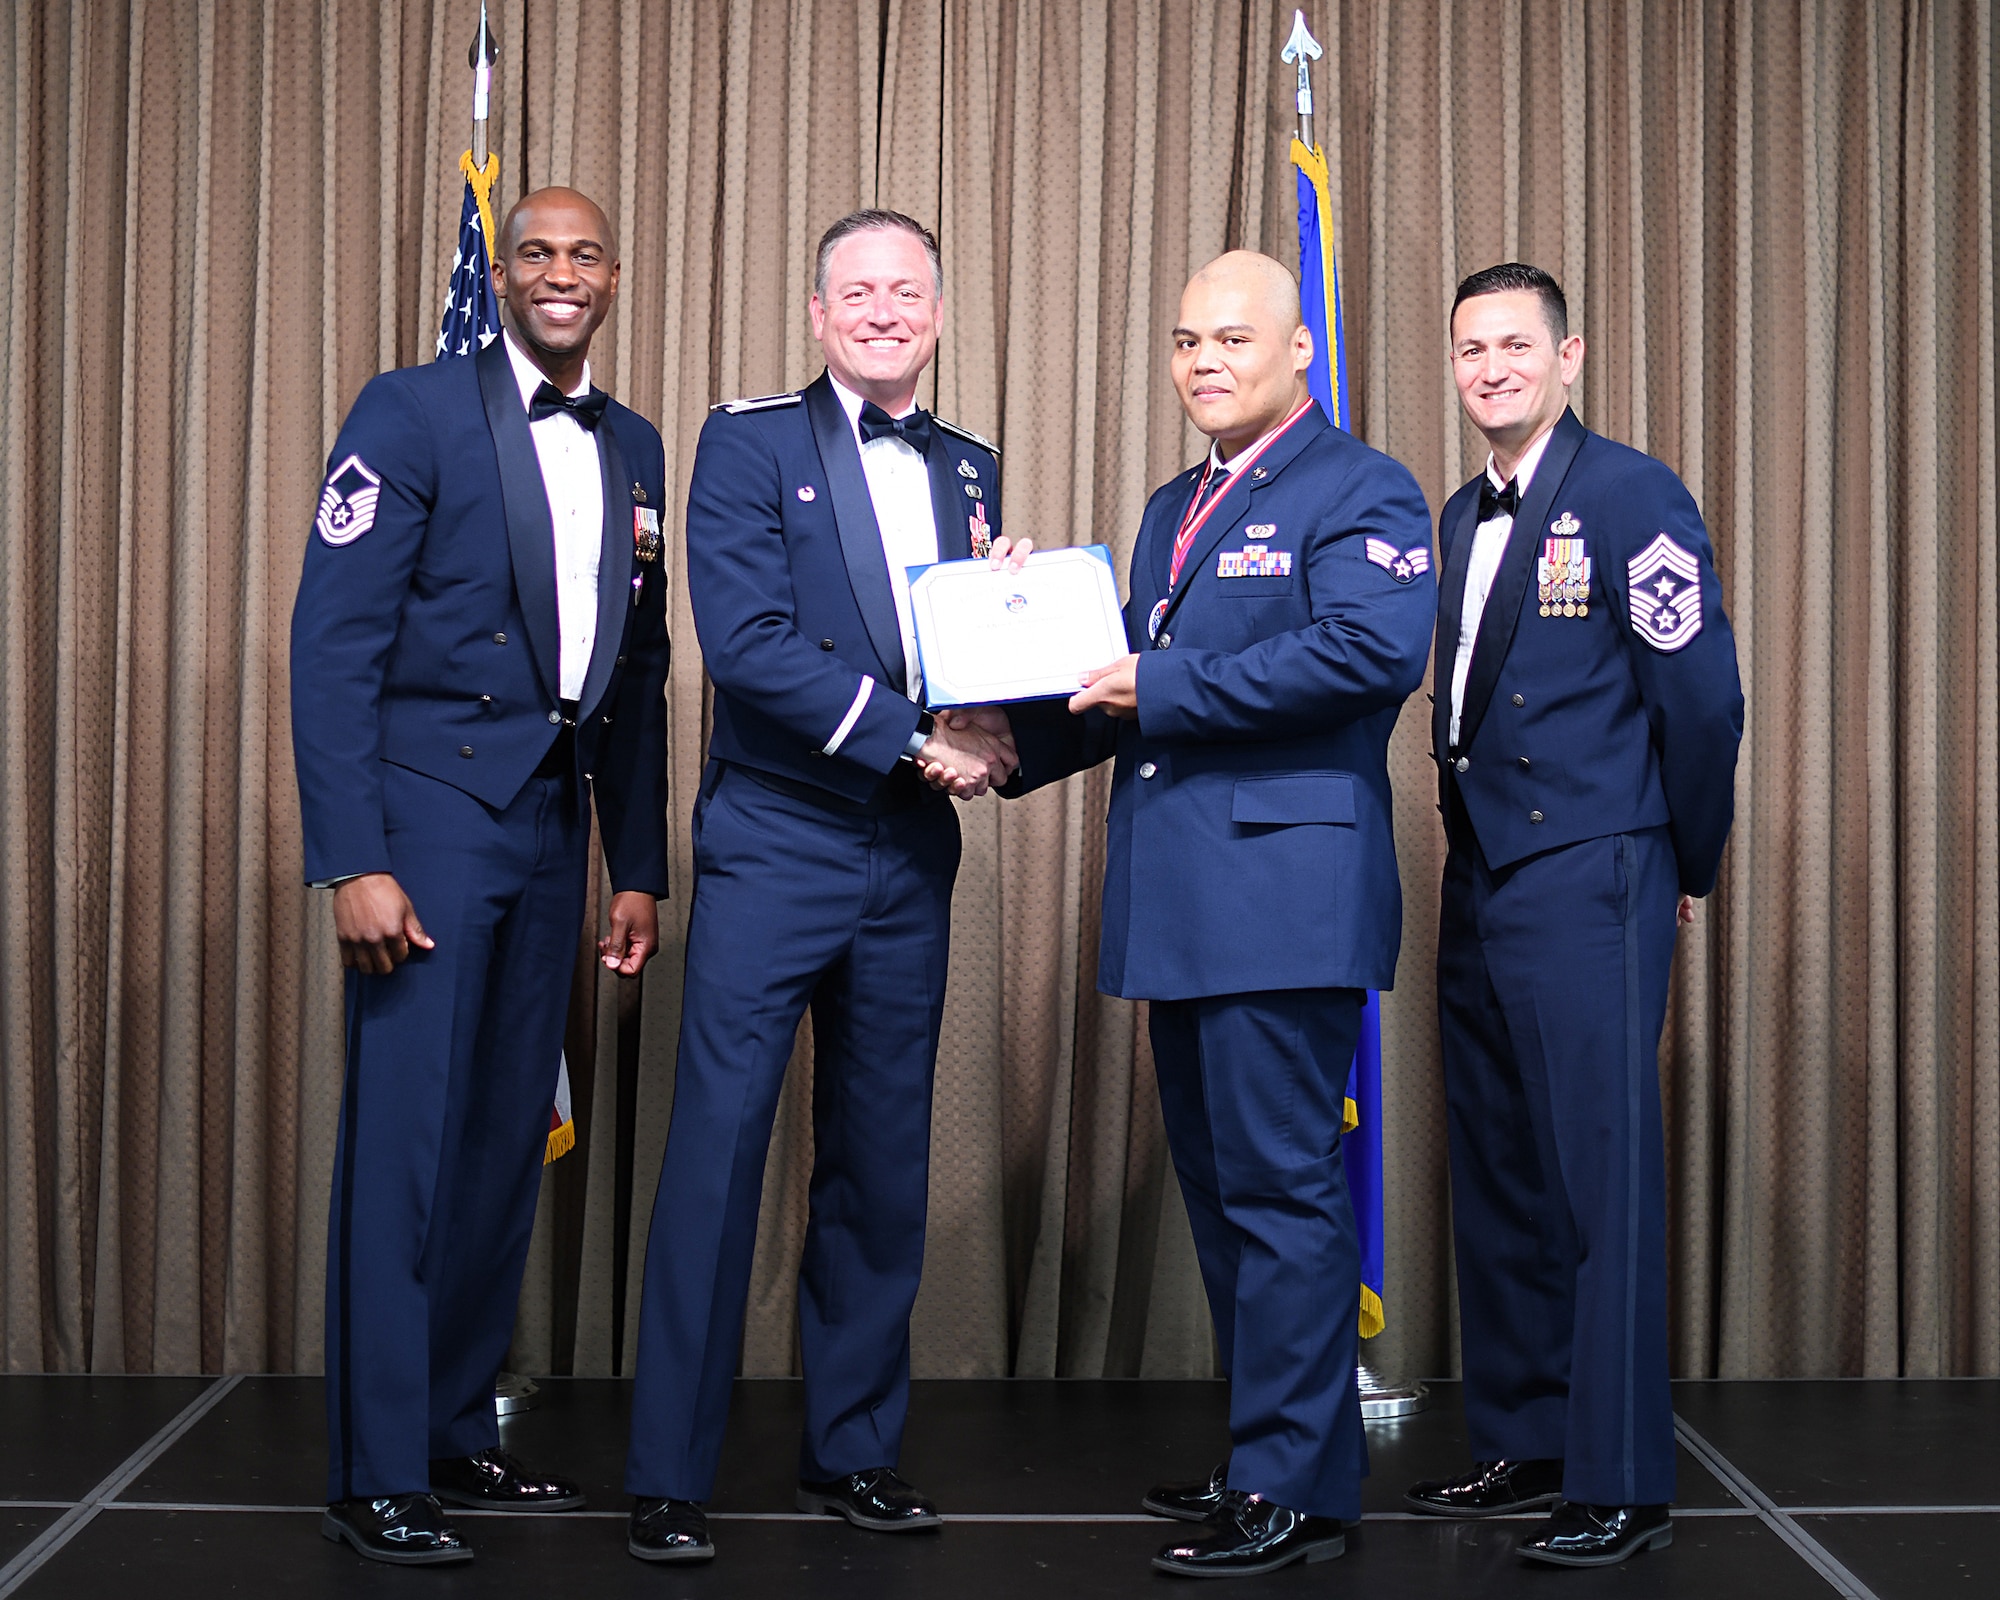 Col. Benjamin Spencer, 319th Air Base Wing commander, presents diploma to SrA Kim Delos Santos, Etchberger Airman Leadership School graduate, June 20, 2019, on Grand Forks Air Force Base, North Dakota. ALS graduation is the culmination of the first level of the Enlisted Professional Military Education continuum directed toward preparing upcoming noncommissioned officers with leadership skills for their careers. (U.S. Air Force photo by Senior Airman Elijaih Tiggs)